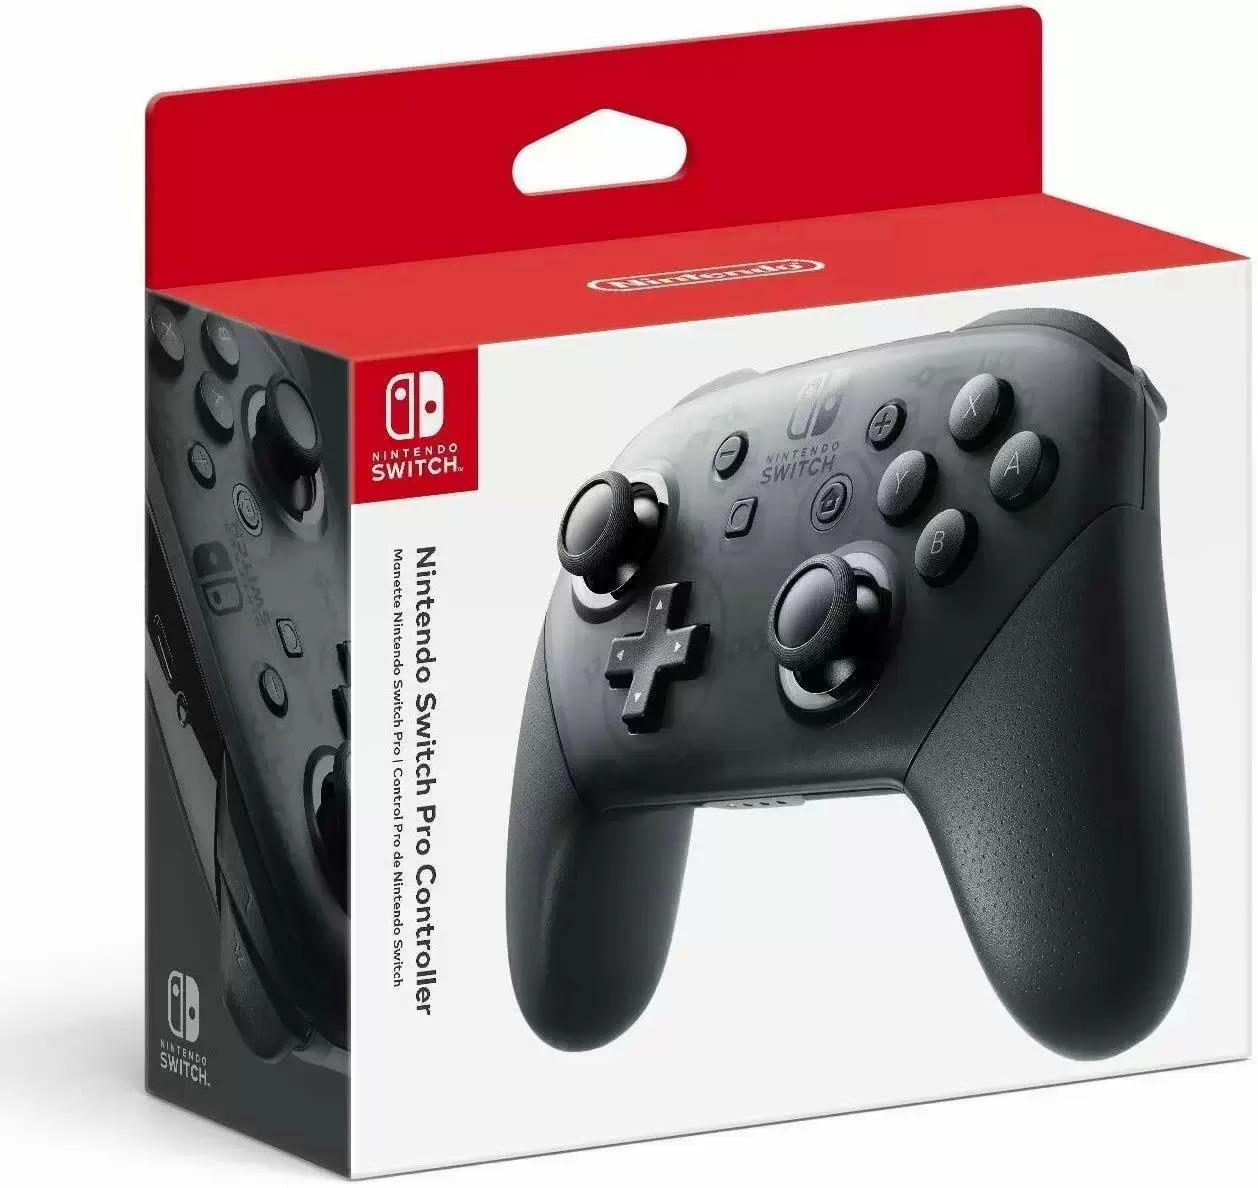 Nintendo Switch Pro Controller for $54.99 Shipped